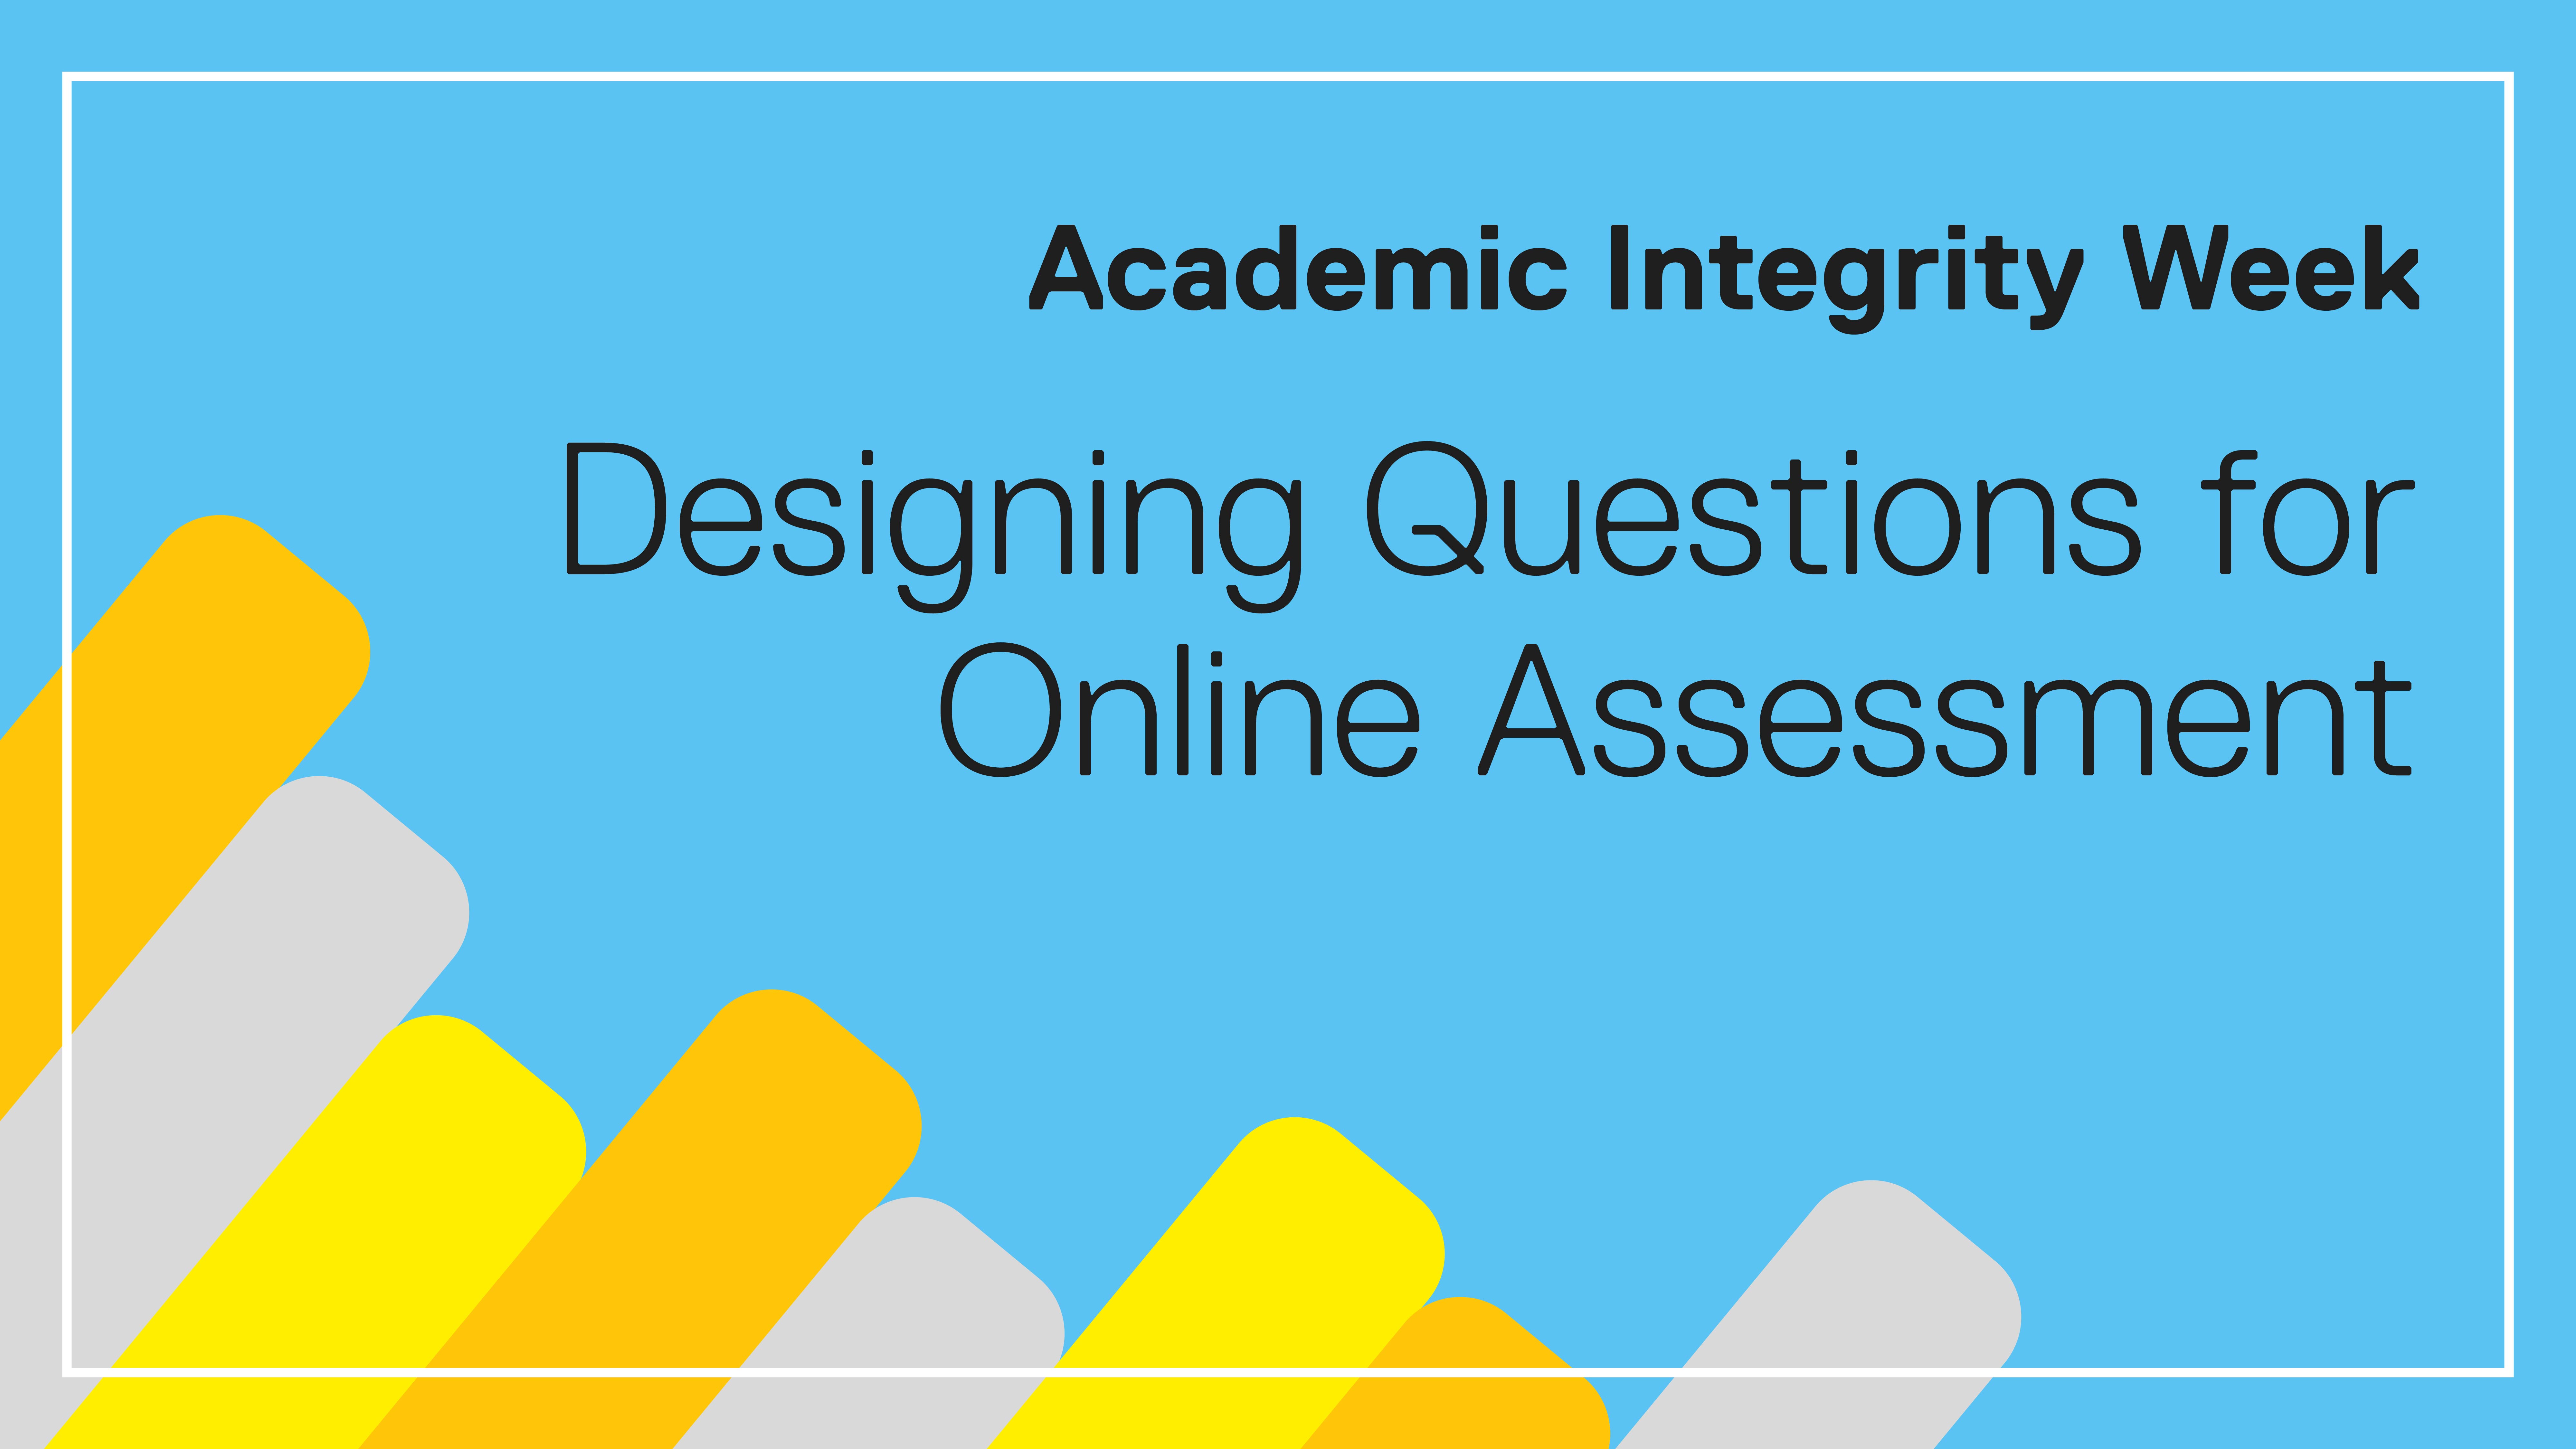 Academic Integrity Week: Designing Questions for Online Assessment